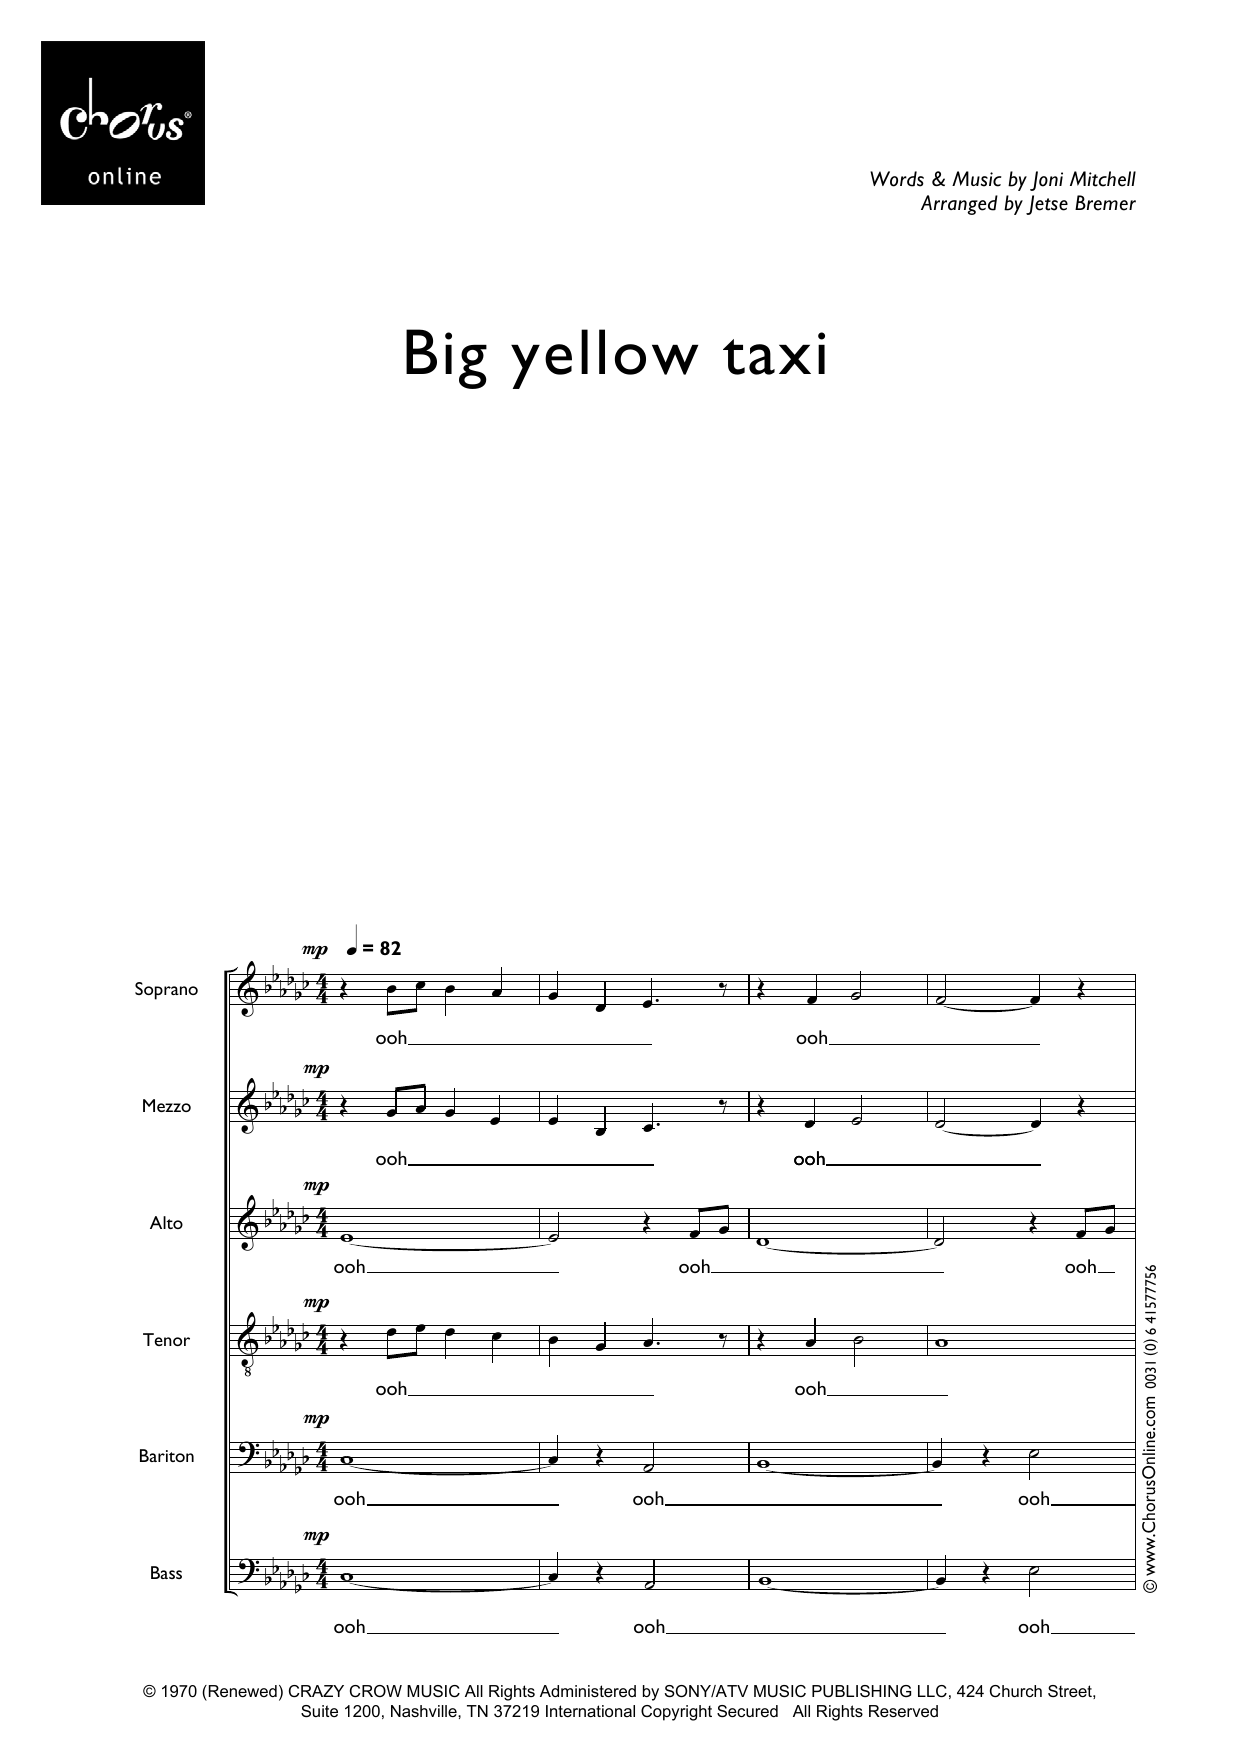 Counting Crows Big Yellow Taxi (arr. Jetse Bremer) sheet music notes printable PDF score